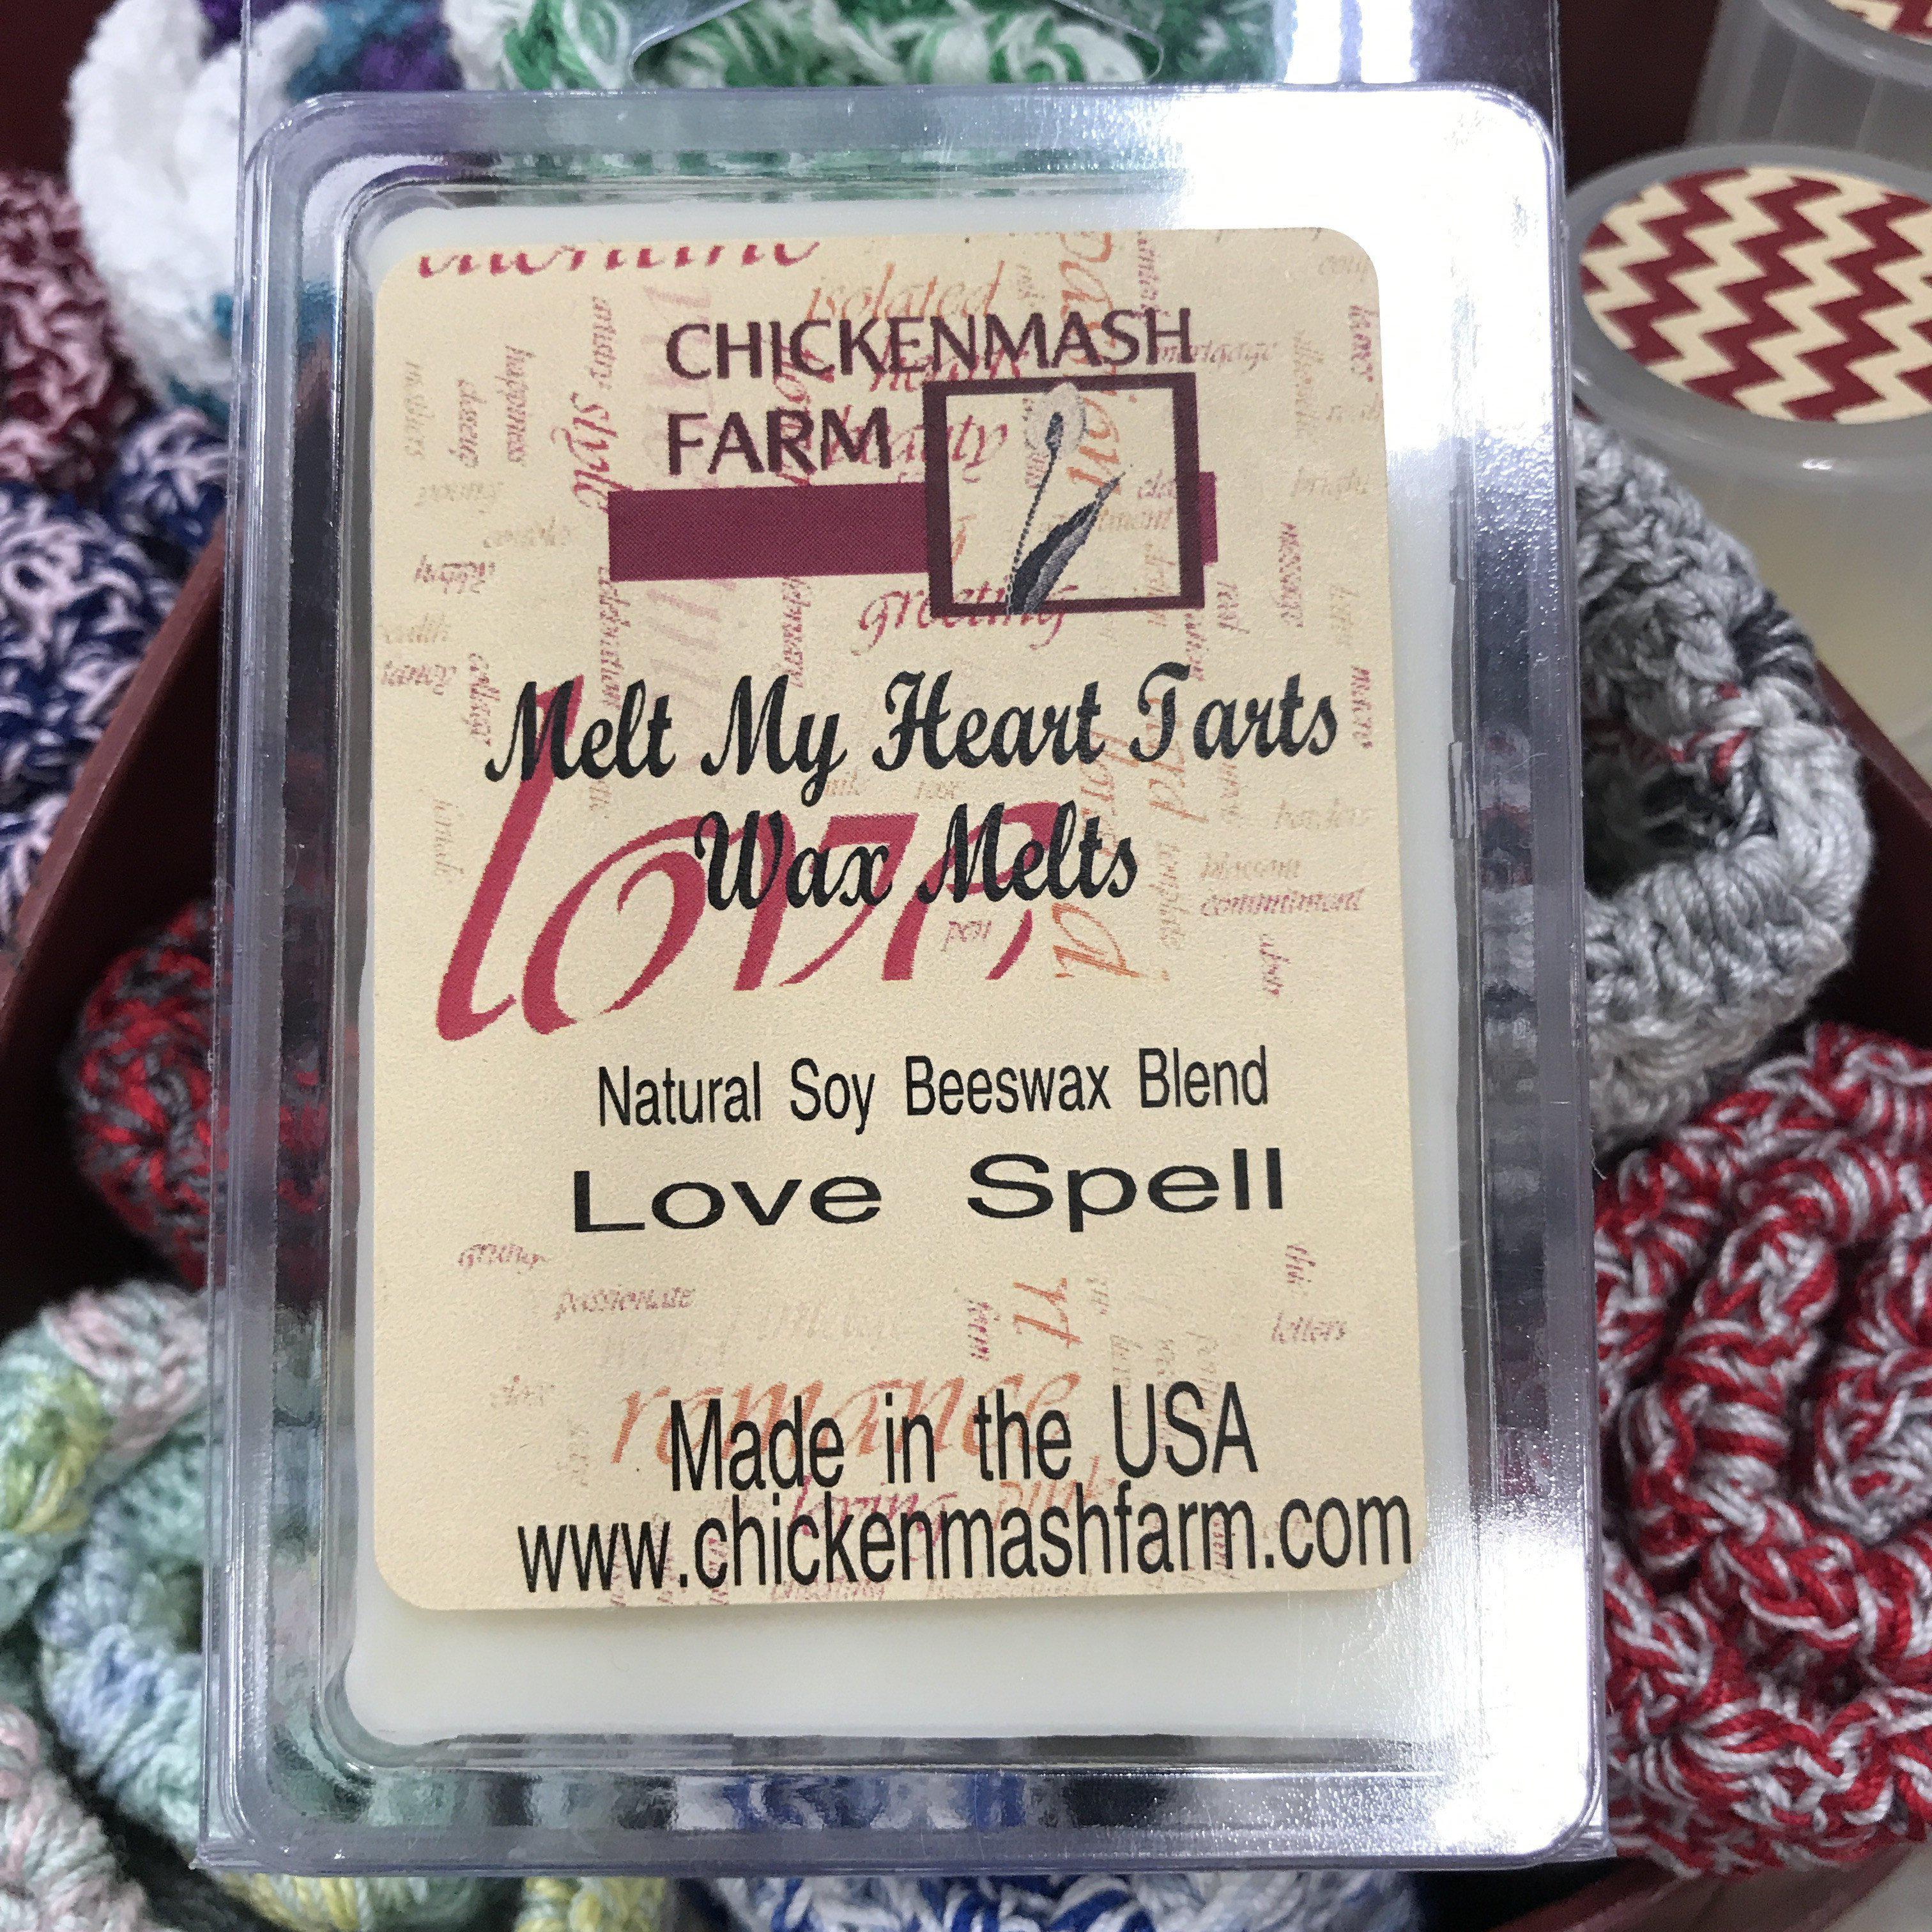 Love Spell Highly Fragrant Candle Melts  Wax Melts Soy Beeswax Blend -  Chickenmash Farm